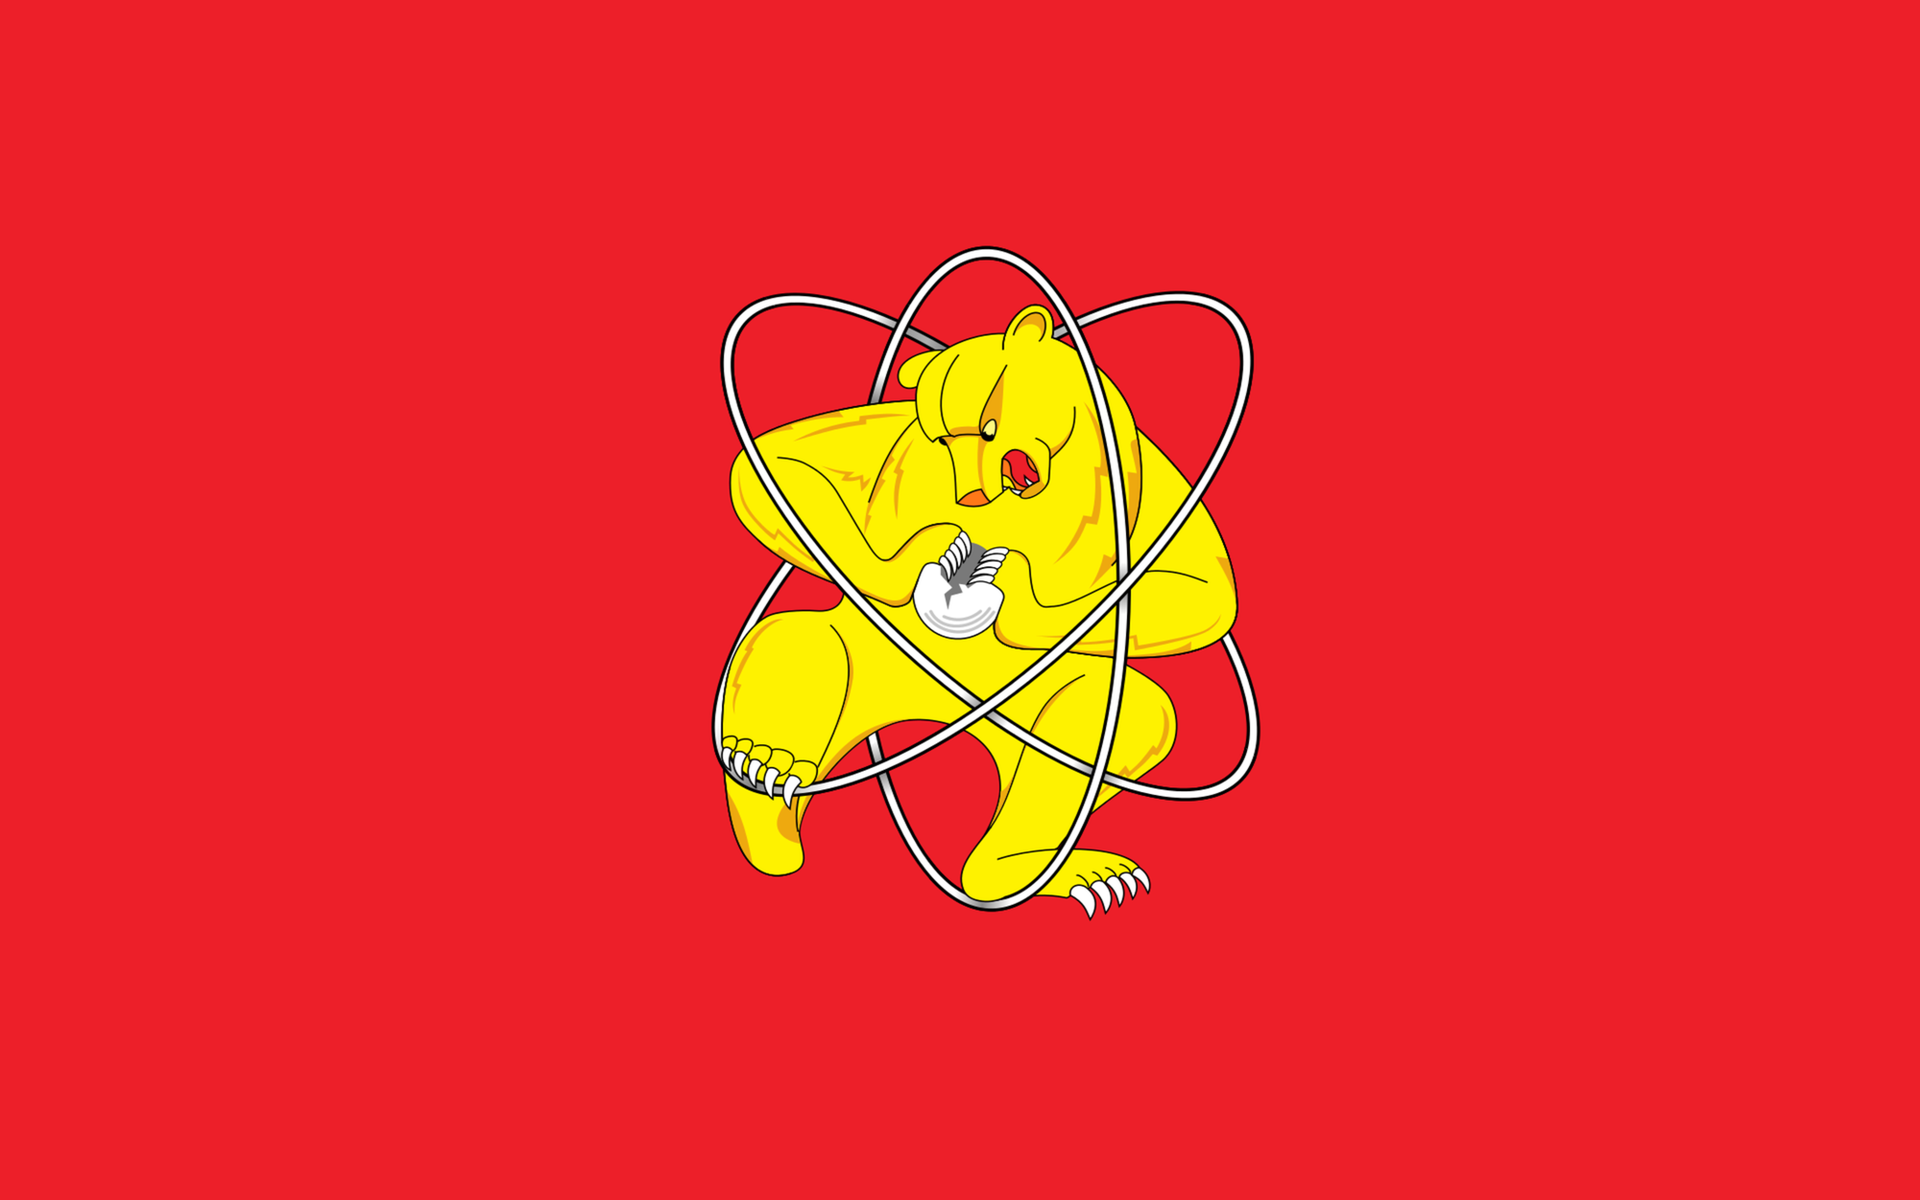 General 1920x1200 Russia red background bears animals artwork mammals simple background nuclear minimalism humor atoms